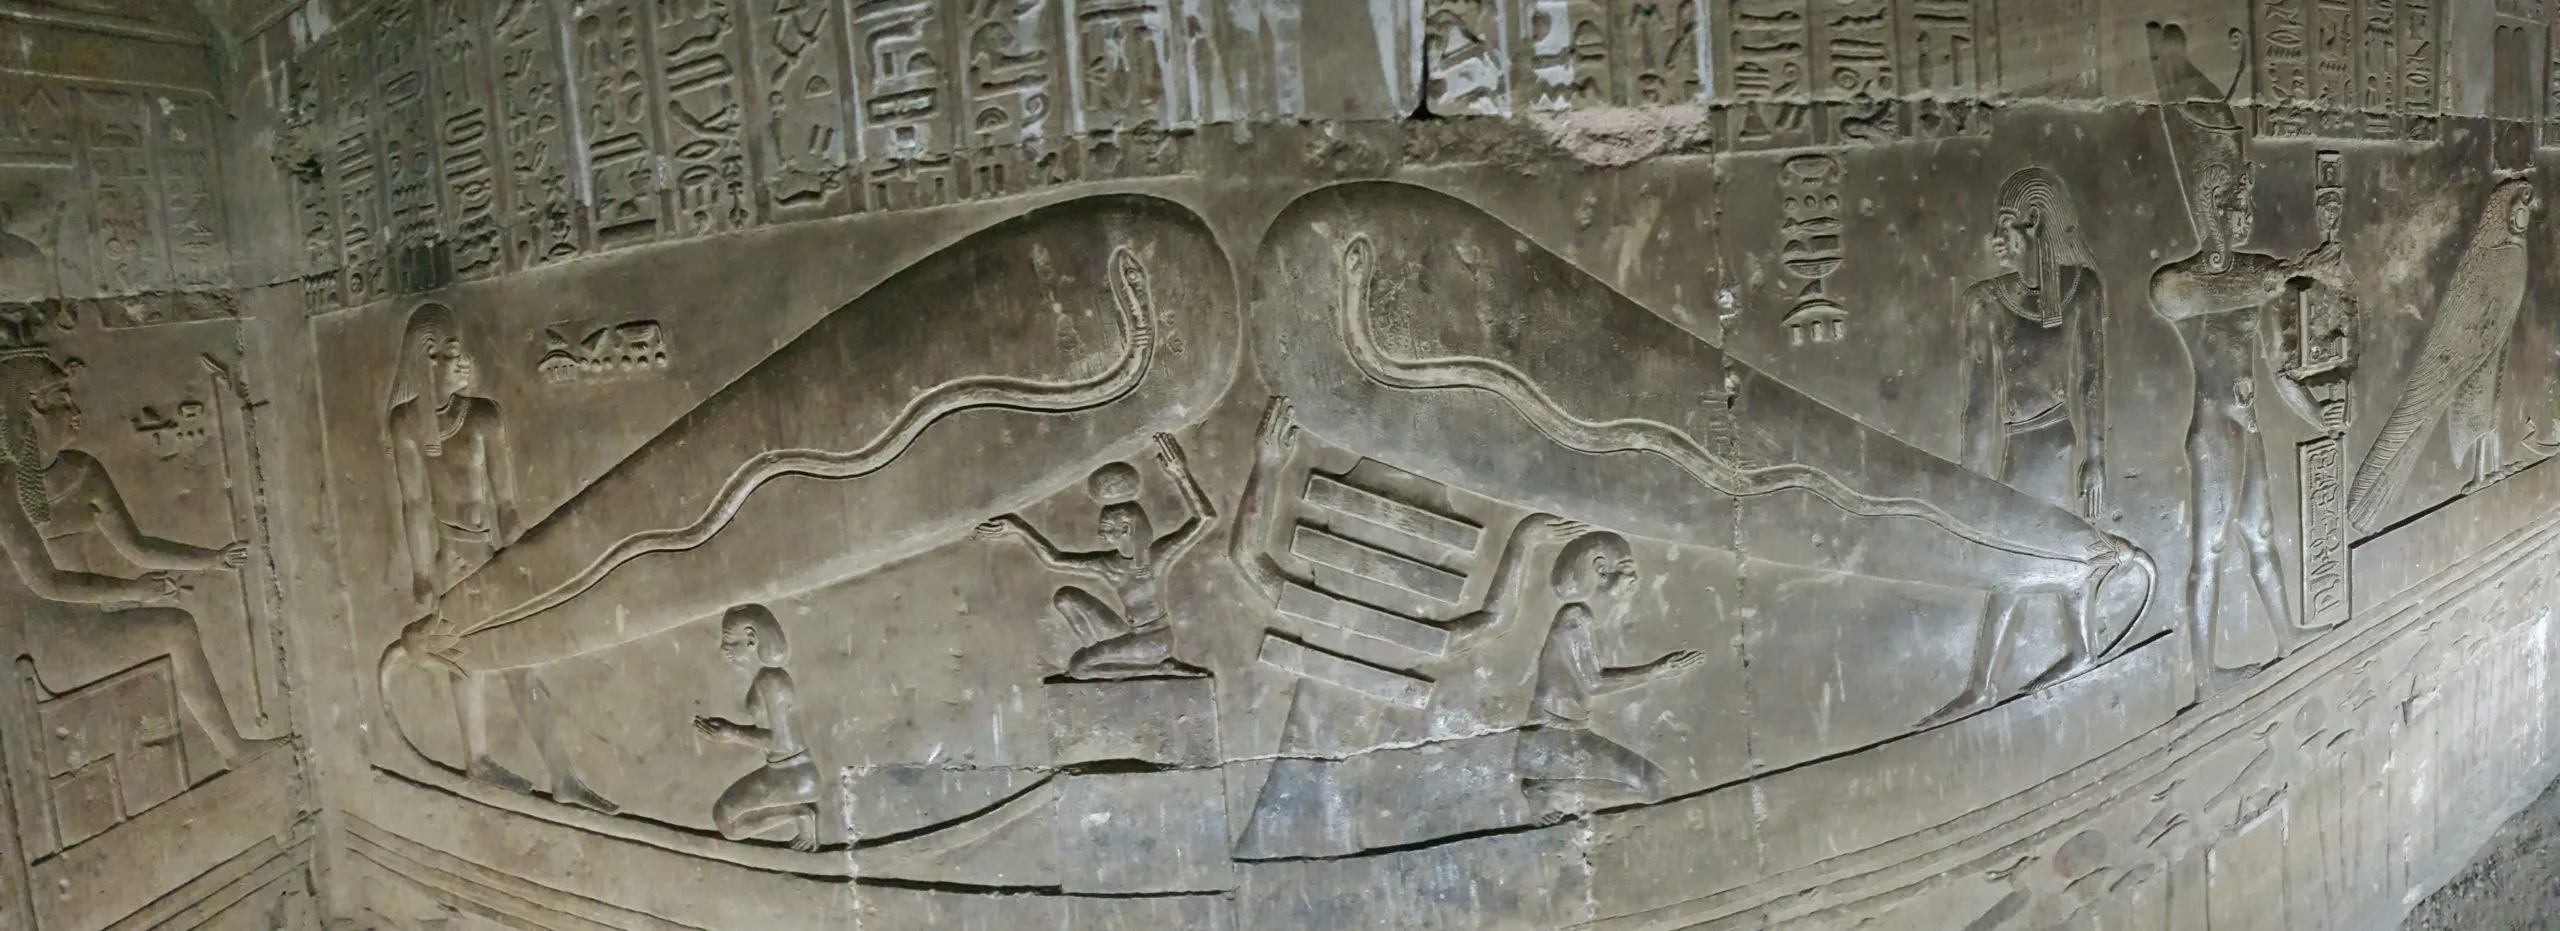 Hathor Temple Complex With Carving Of A Light Bulb In A Krypta In The Base